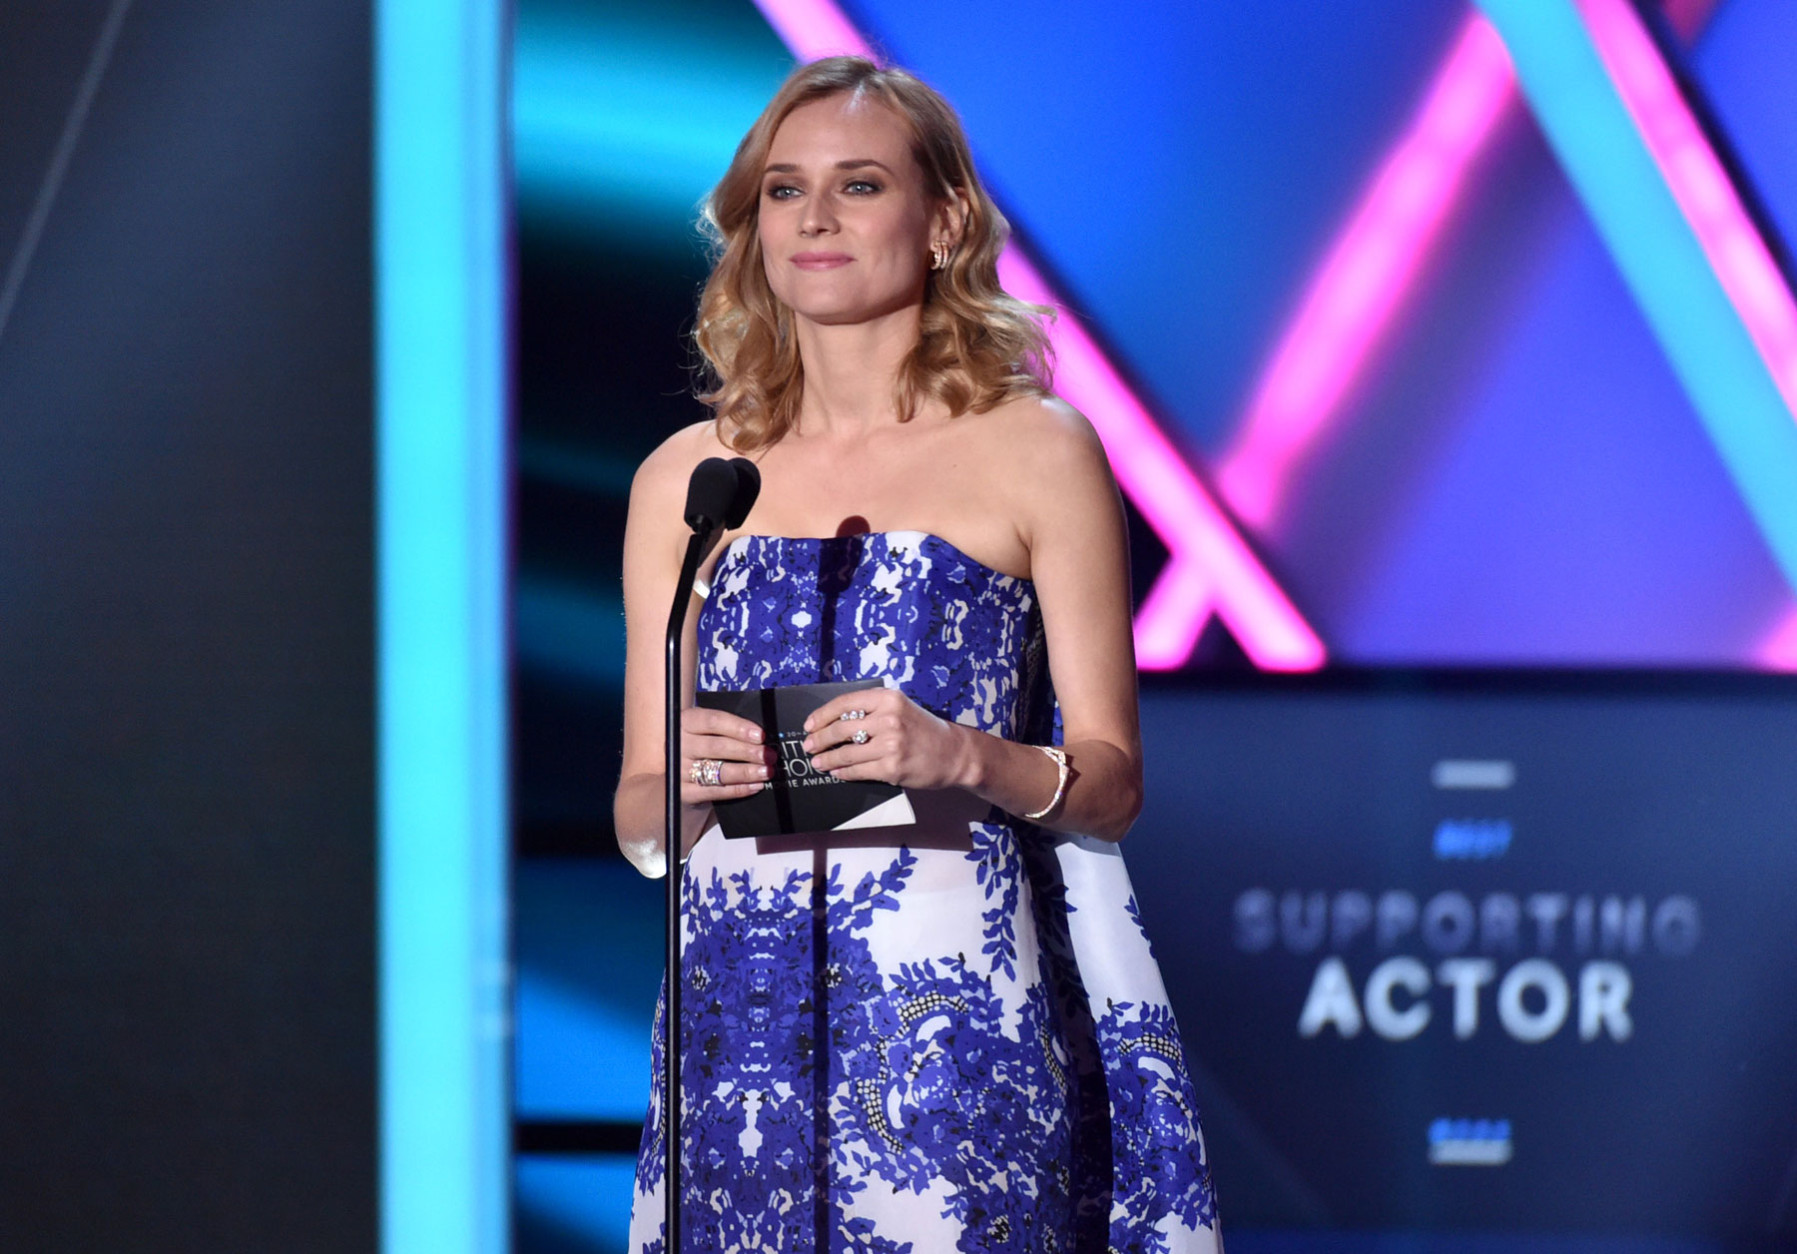 

Diane Kruger presents the best supporting actor award at the 20th annual Critics' Choice Movie Awards at the Hollywood Palladium on Thursday, Jan. 15, 2015, in Los Angeles. (Photo by John Shearer/Invision/AP)